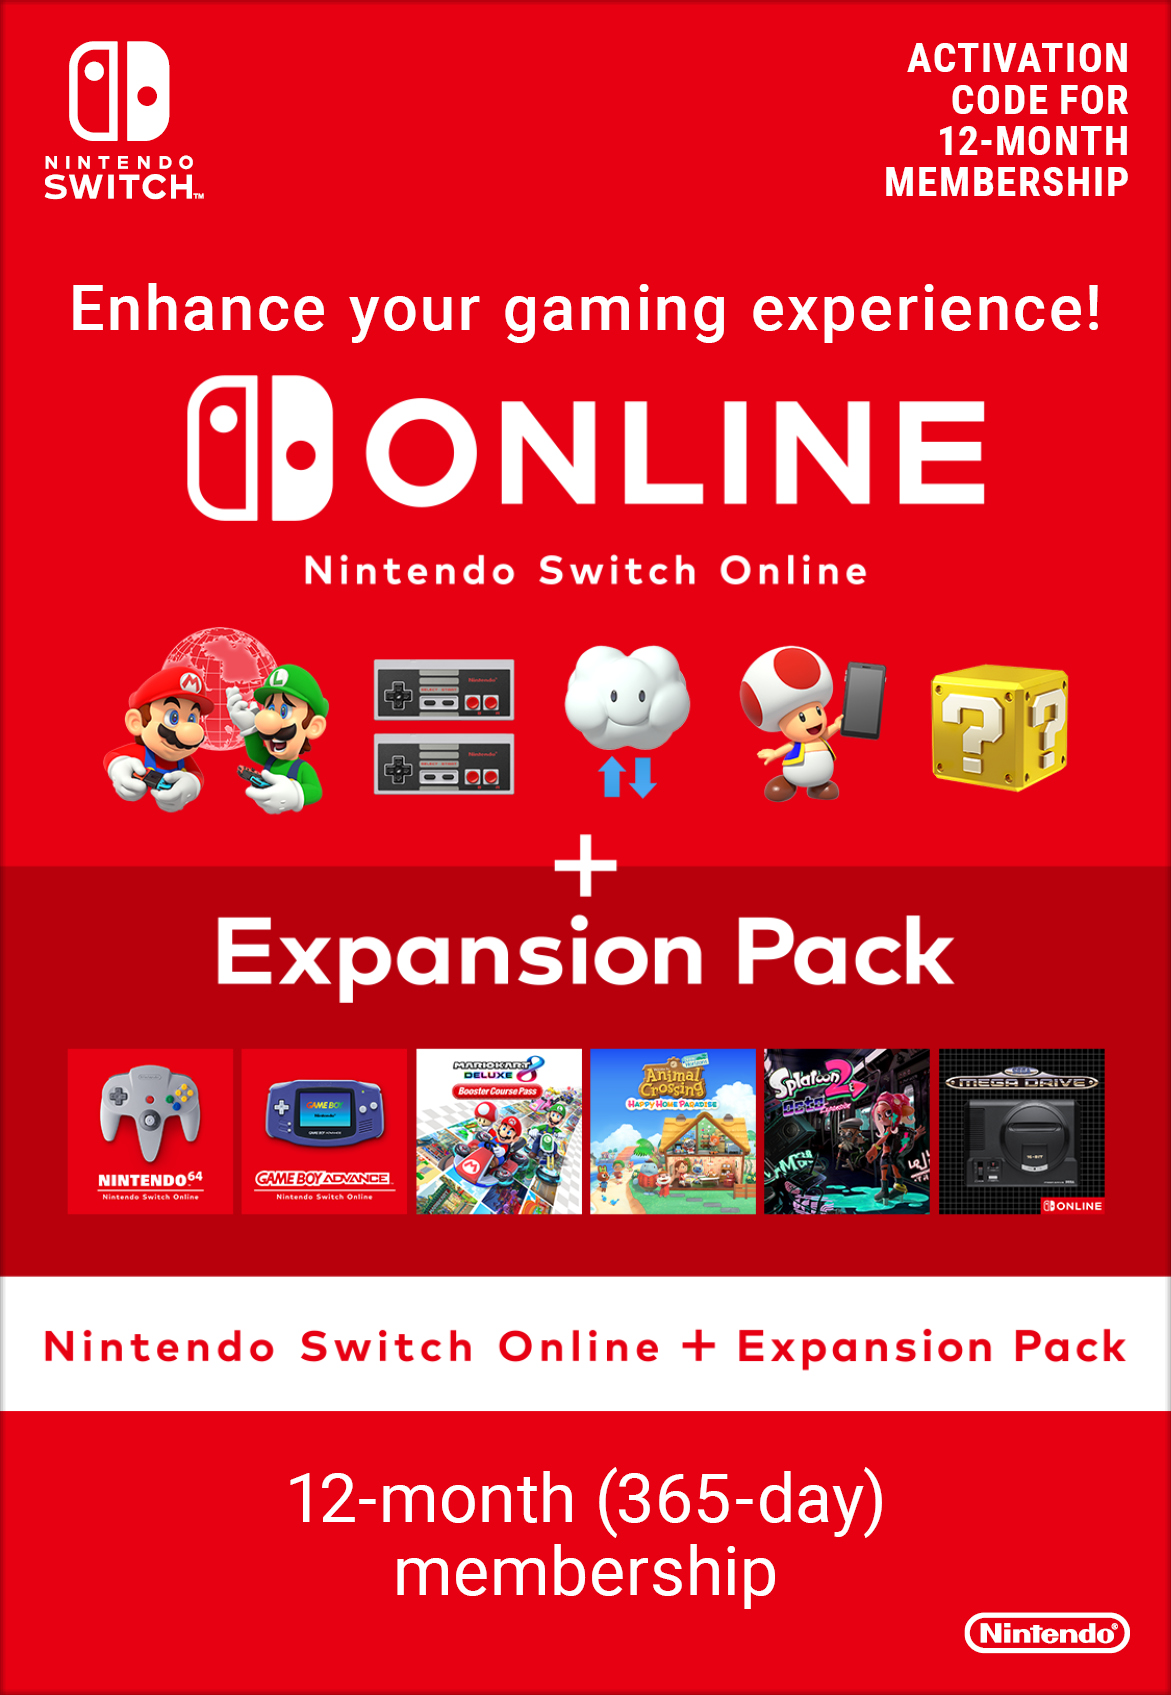 Nintendo Switch Online + | Gamecardsdirect Expansion Days 365 Pack